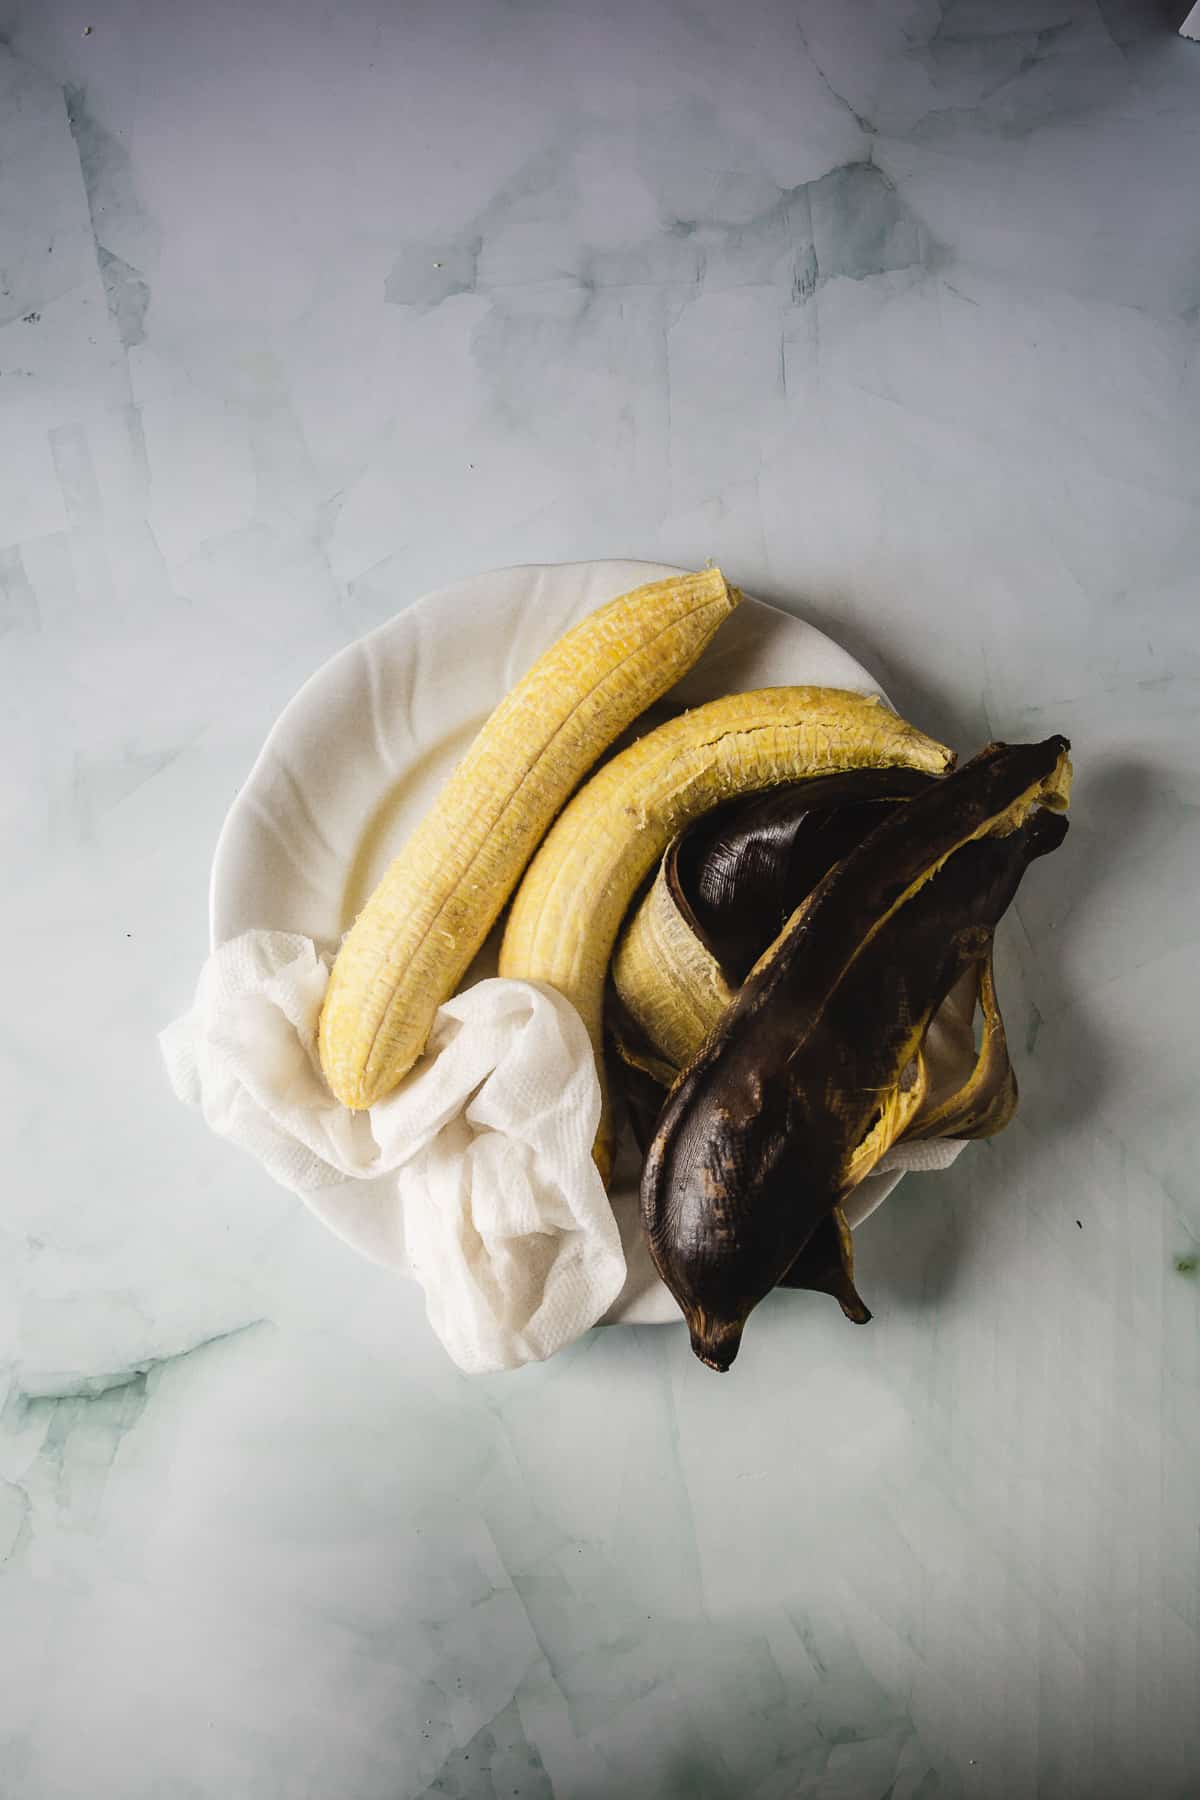 A bowl containing one whole plantain, one partially-peeled banana, and one completely-peeled plantain, displayed on a marbled surface next to Colombian Patacones.